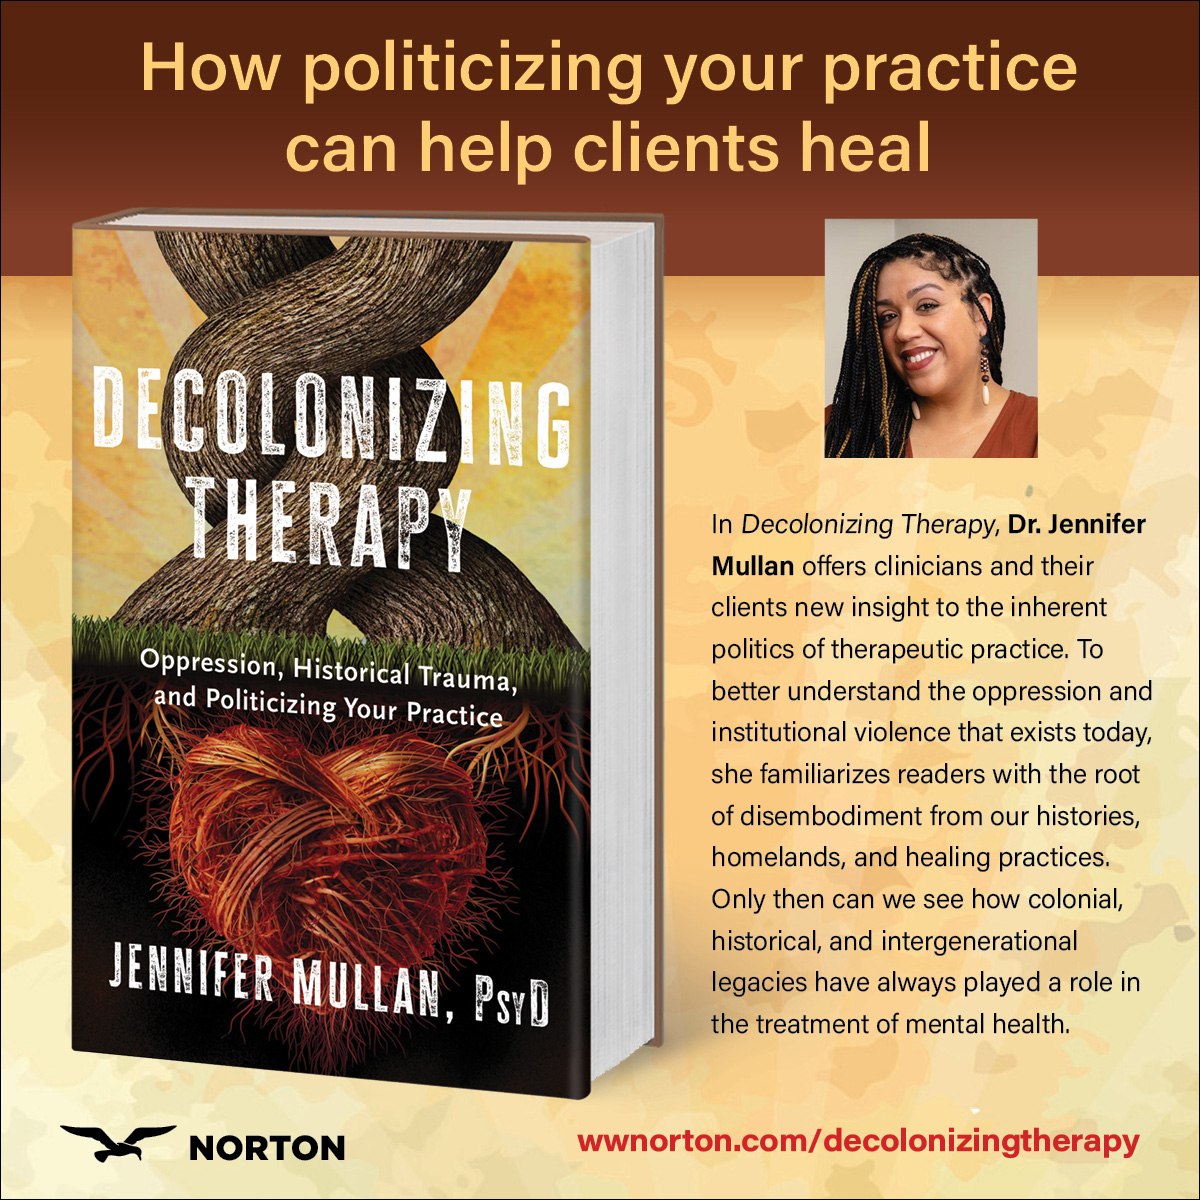 DECOLONIZING THERAPY by Dr. Jennifer Mullan is now available! '@DrJennyJennM nurtures a space for us to dig deep into rooted, humanizing, reparenting, loving, new world work that bridges the ancient.' —@DrShefali, clinical psychologist Learn more at bit.ly/3SgLJkk